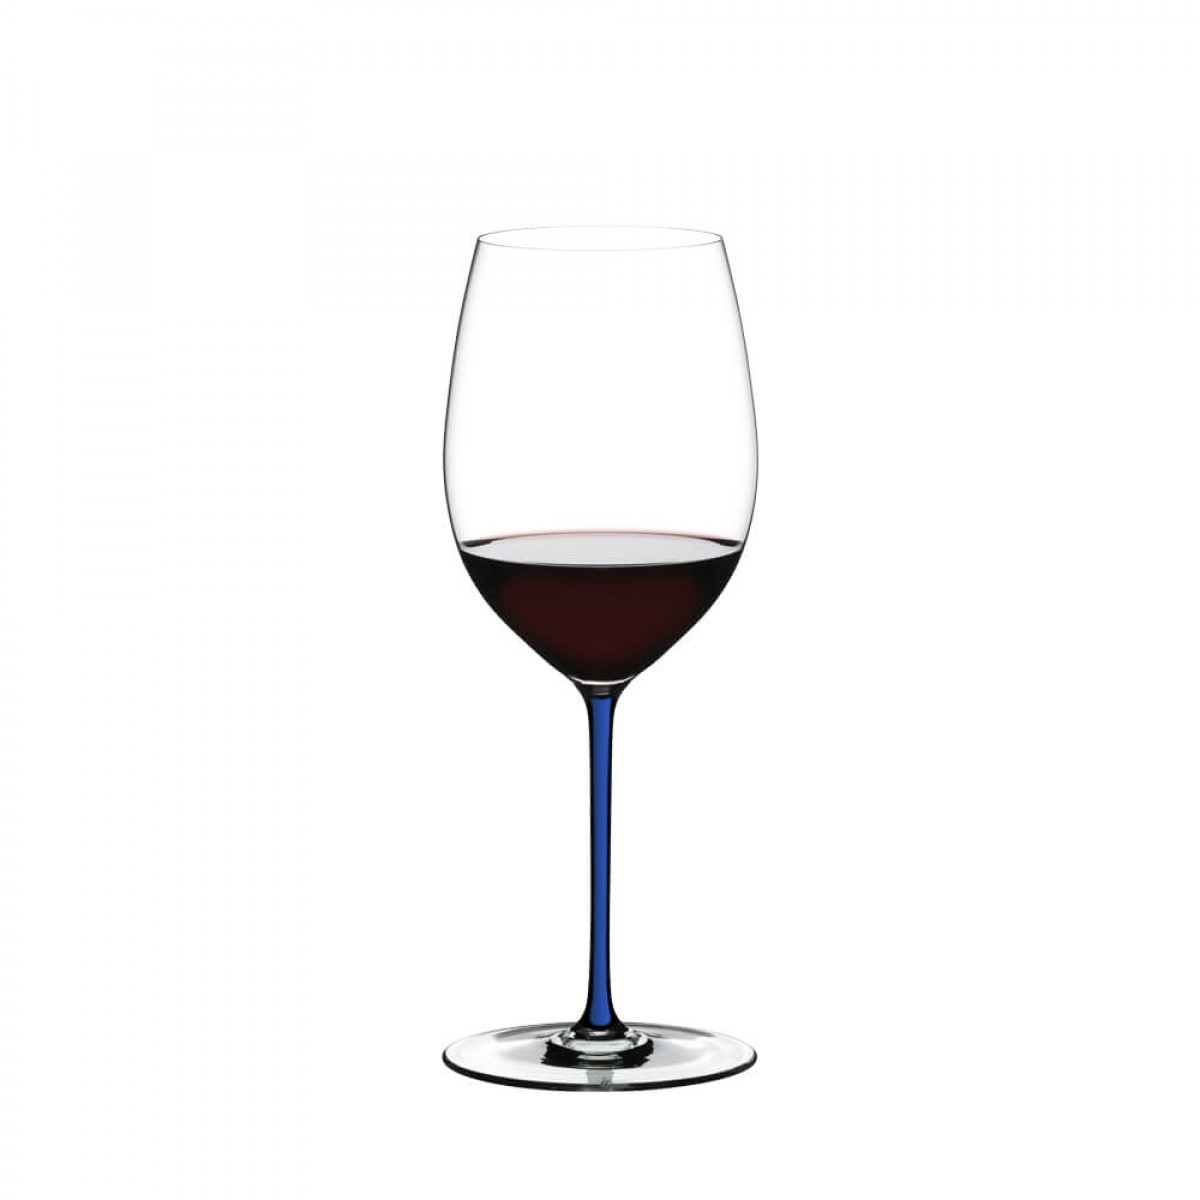 26 Perfect Navy Blue Vase 2024 free download navy blue vase of fatto a mano cabernet dark blue 4900 0d fatto a mano series inside fatto a mano cabernet dark blue 4900 0d